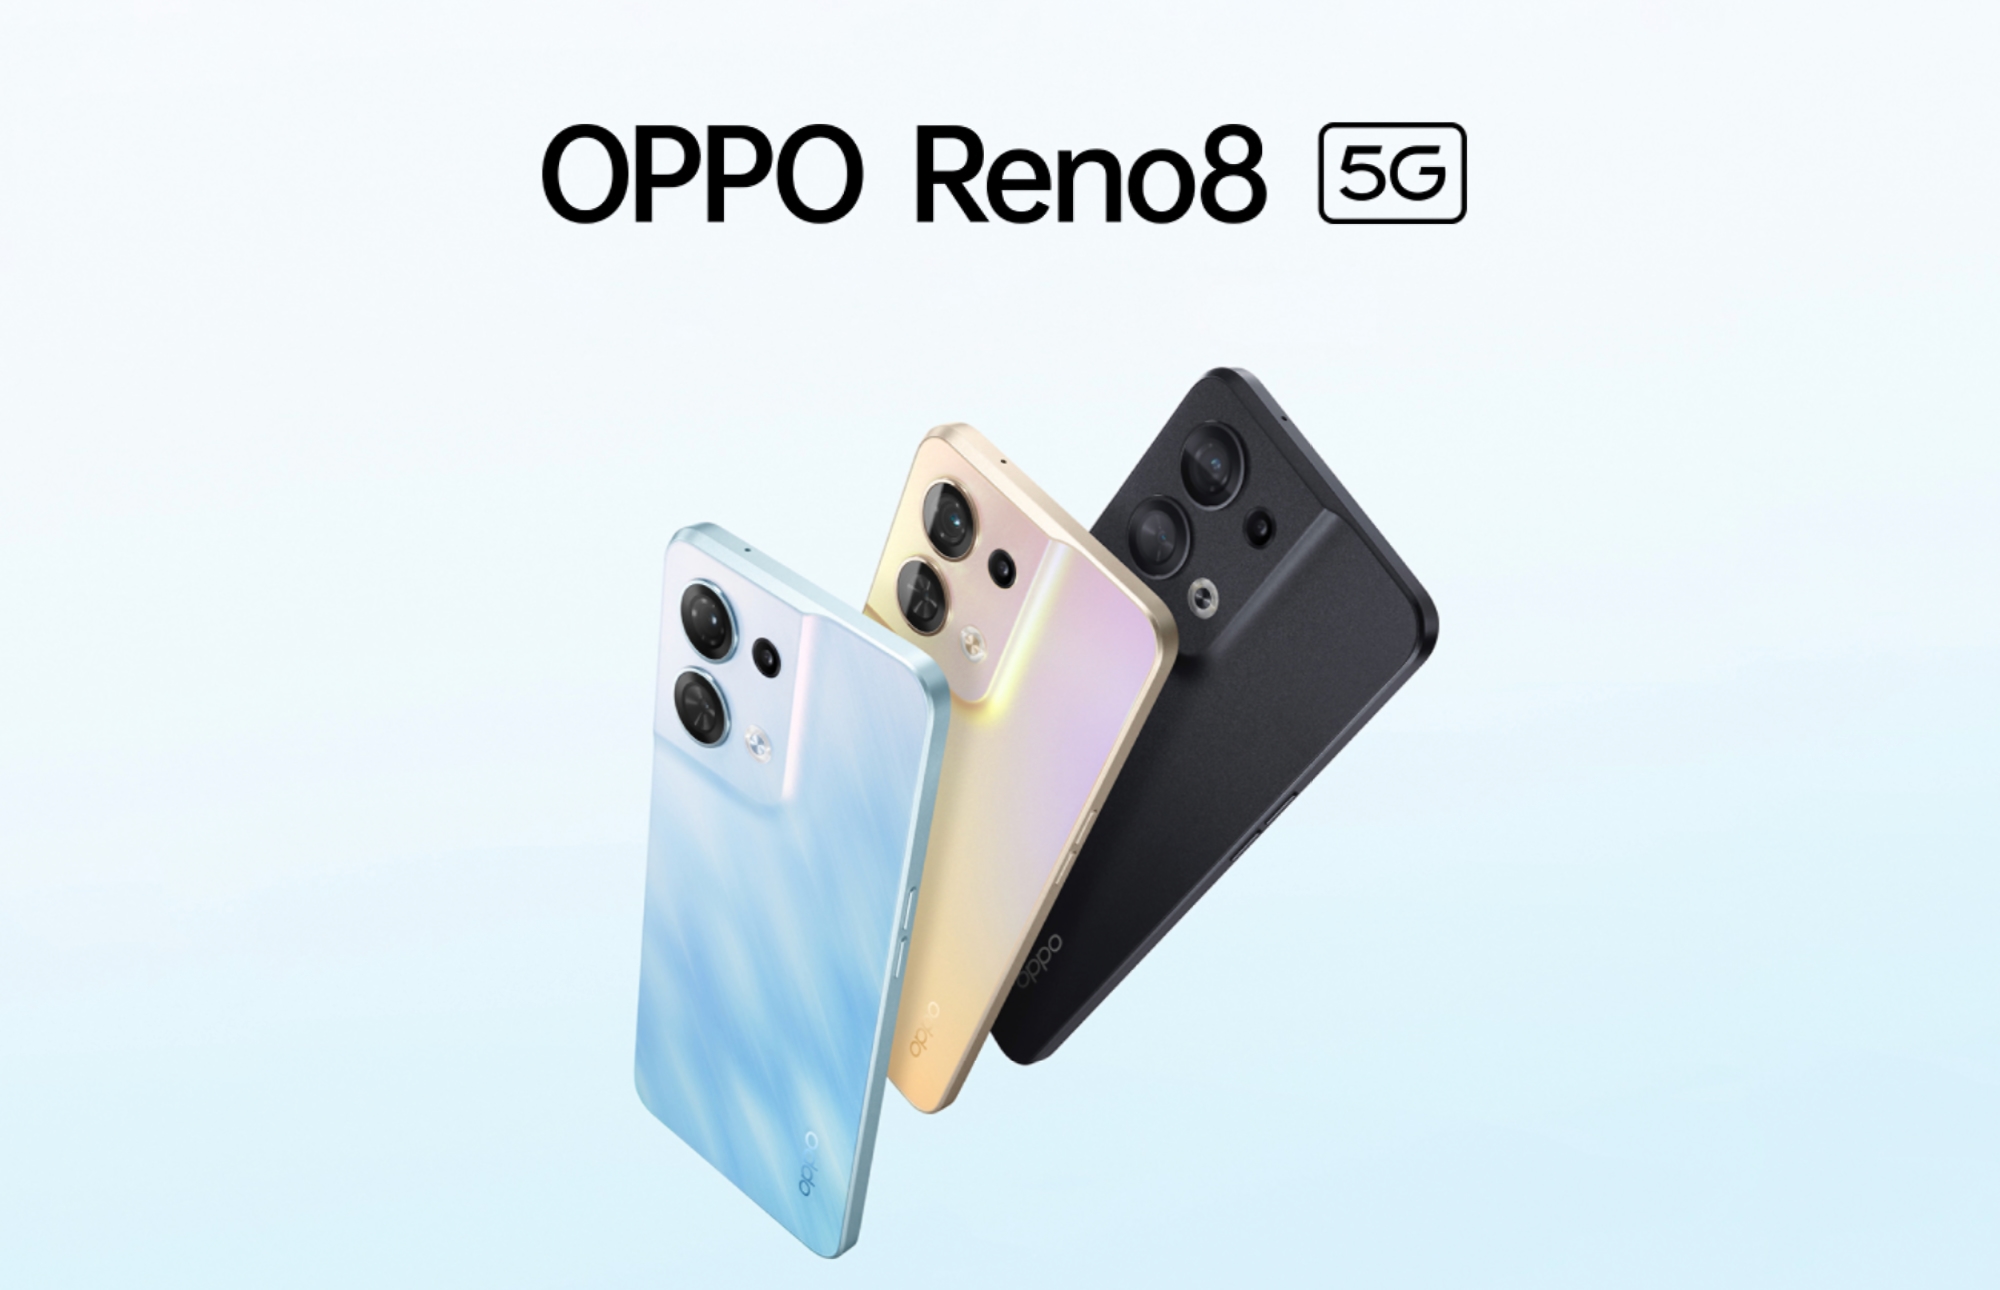 This is what OPPO Reno 8, OPPO Reno 8 Pro and OPPO Reno 8 Pro+ smartphones will look like